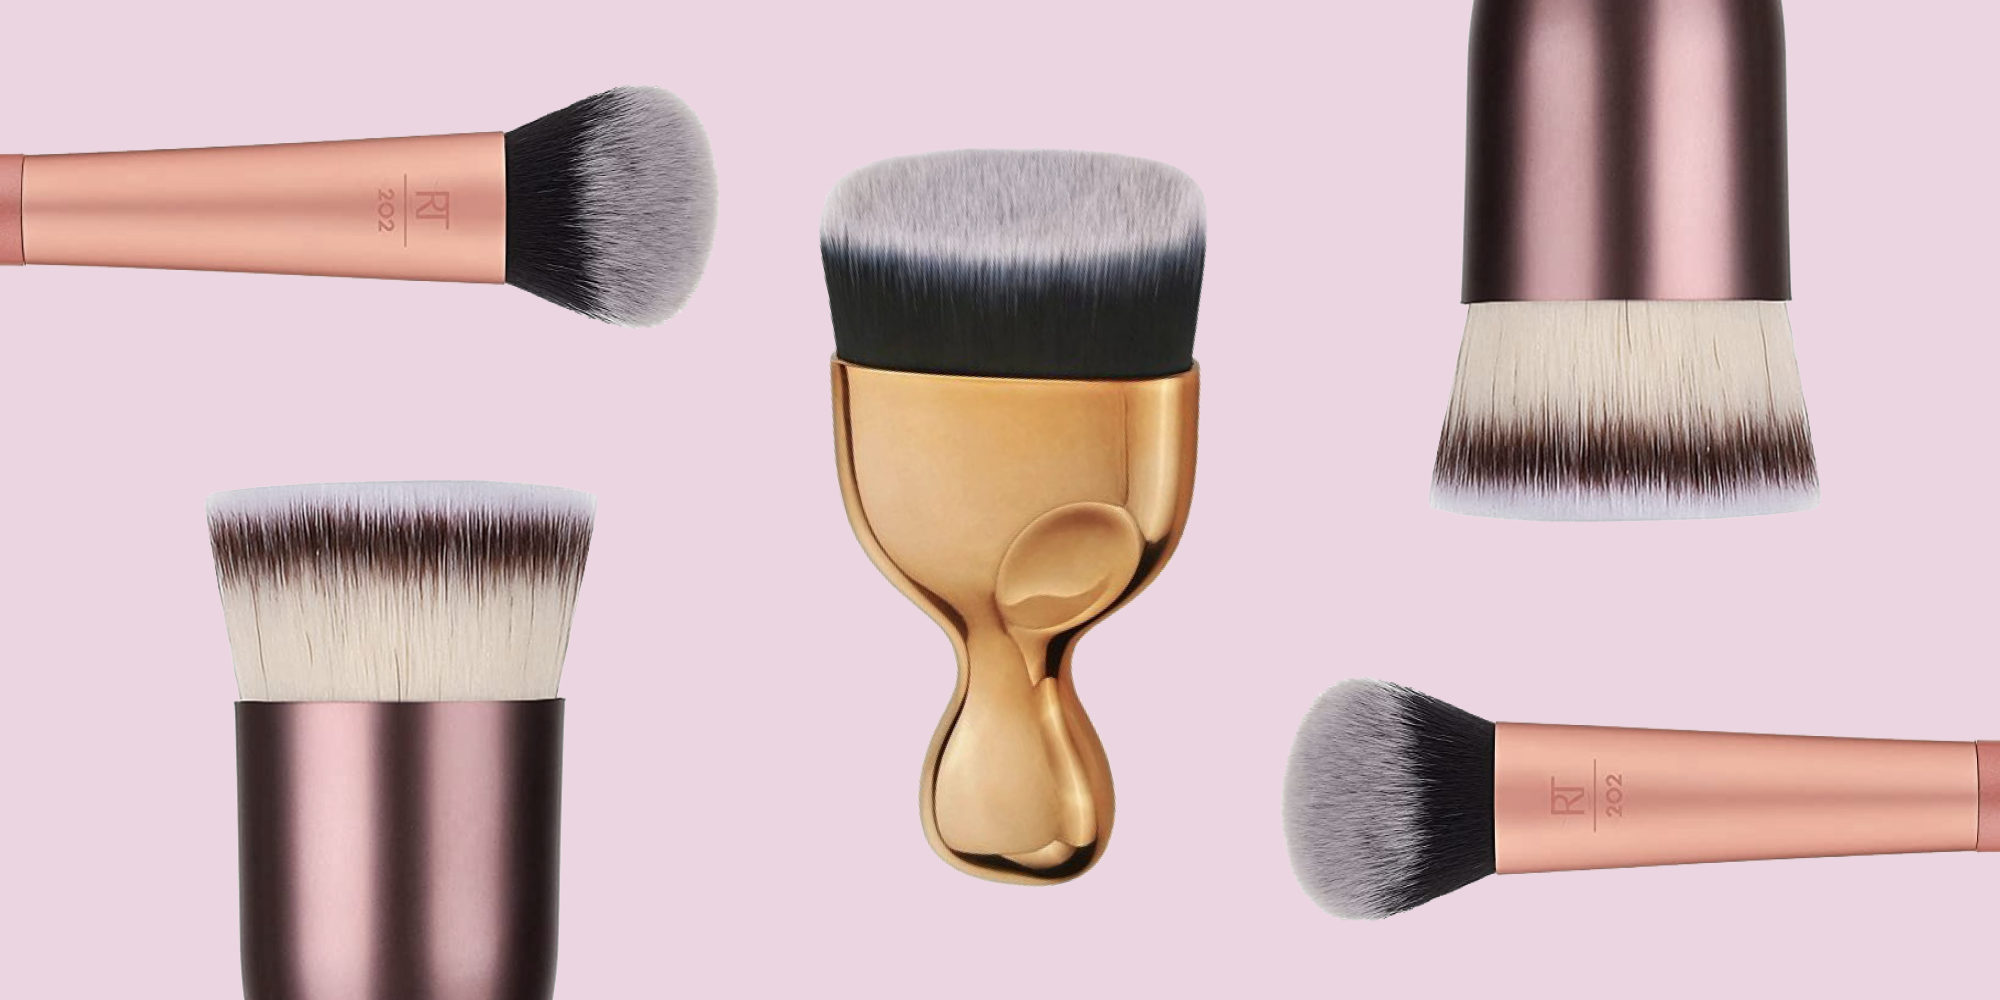 Real Techniques Sheer Radiance Fan Makeup Brush